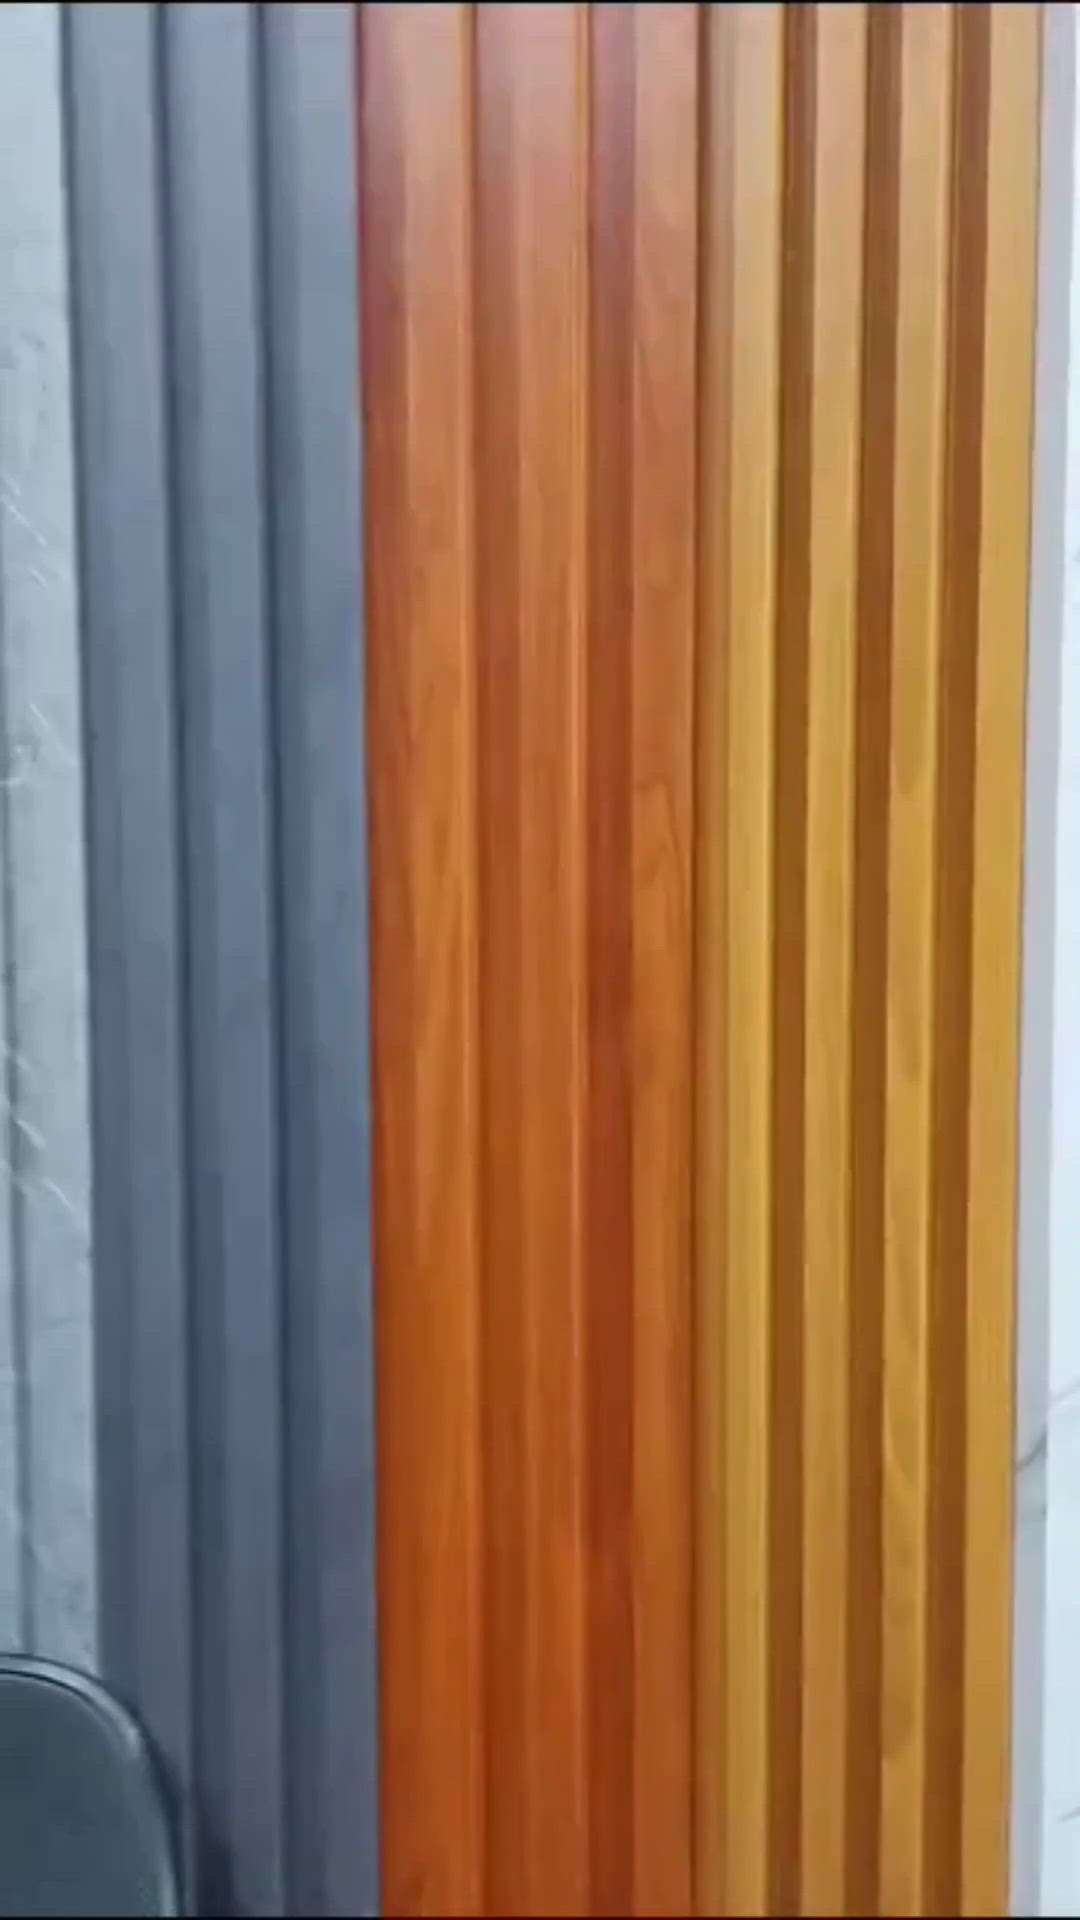 In video Winder Max India Presenting you all type of Exterior & Interior elevation product .Exclusive Range of Beautiful trendy louvers for wall panelling 😍😍.#elevation #architecture #design #interiordesign #construction #elevationdesign #architect #love #interiorlouvers  #exteriordesign #motivation #art #architecturedesign #fundermax #interior #exterior #hplsheet #interiordesigner #elevations #drawing #frontelevation #architecturelovers #home #facade #louvers #exteriorelevation #homedecor . . For more details our all products kindly visit our websitewww.windermaxindia.comwww.indiamake.co.inInfo@windermaxindia.comOr call us on